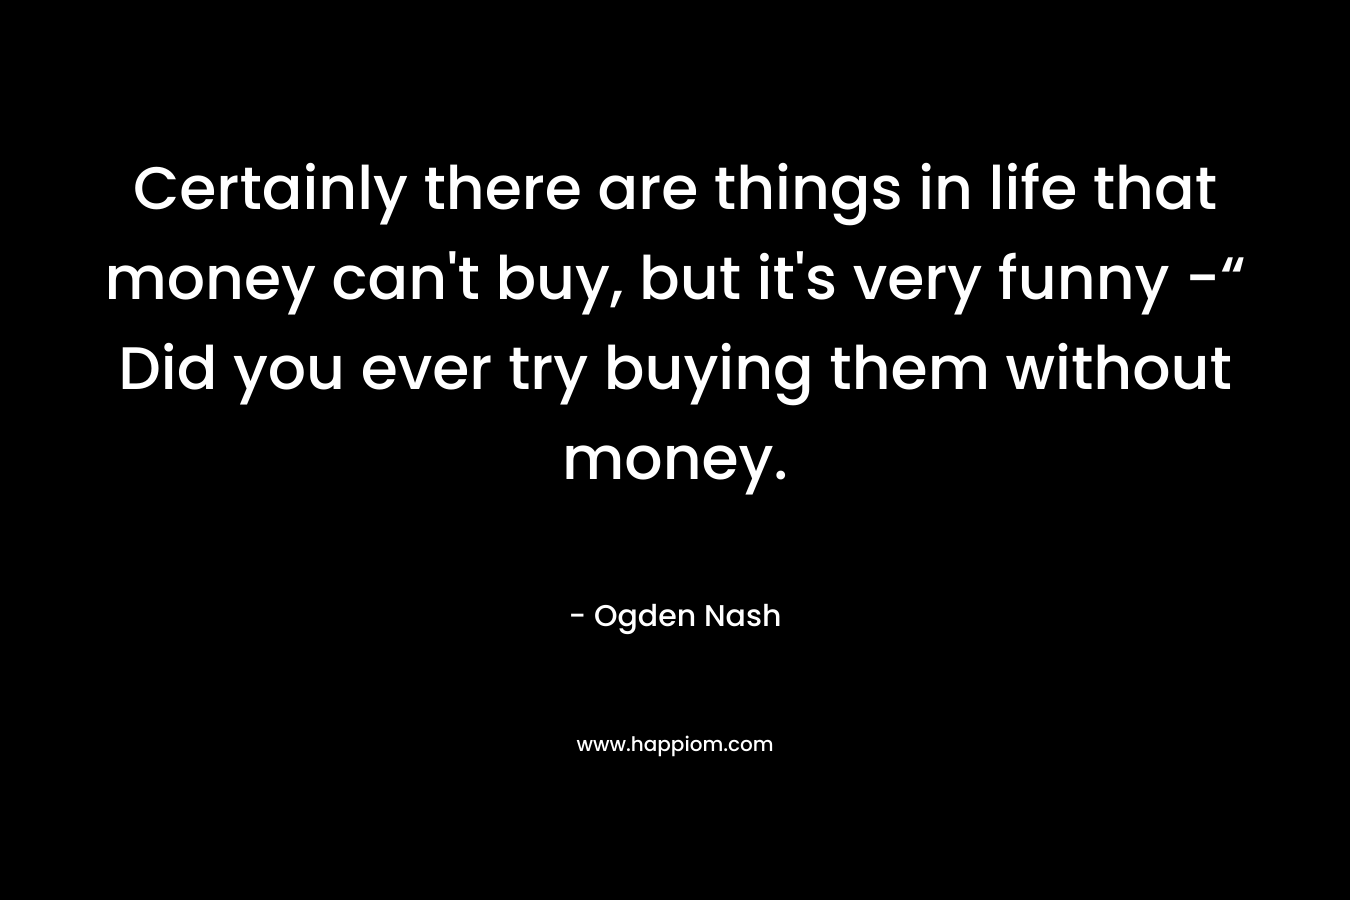 Certainly there are things in life that money can't buy, but it's very funny -“ Did you ever try buying them without money.